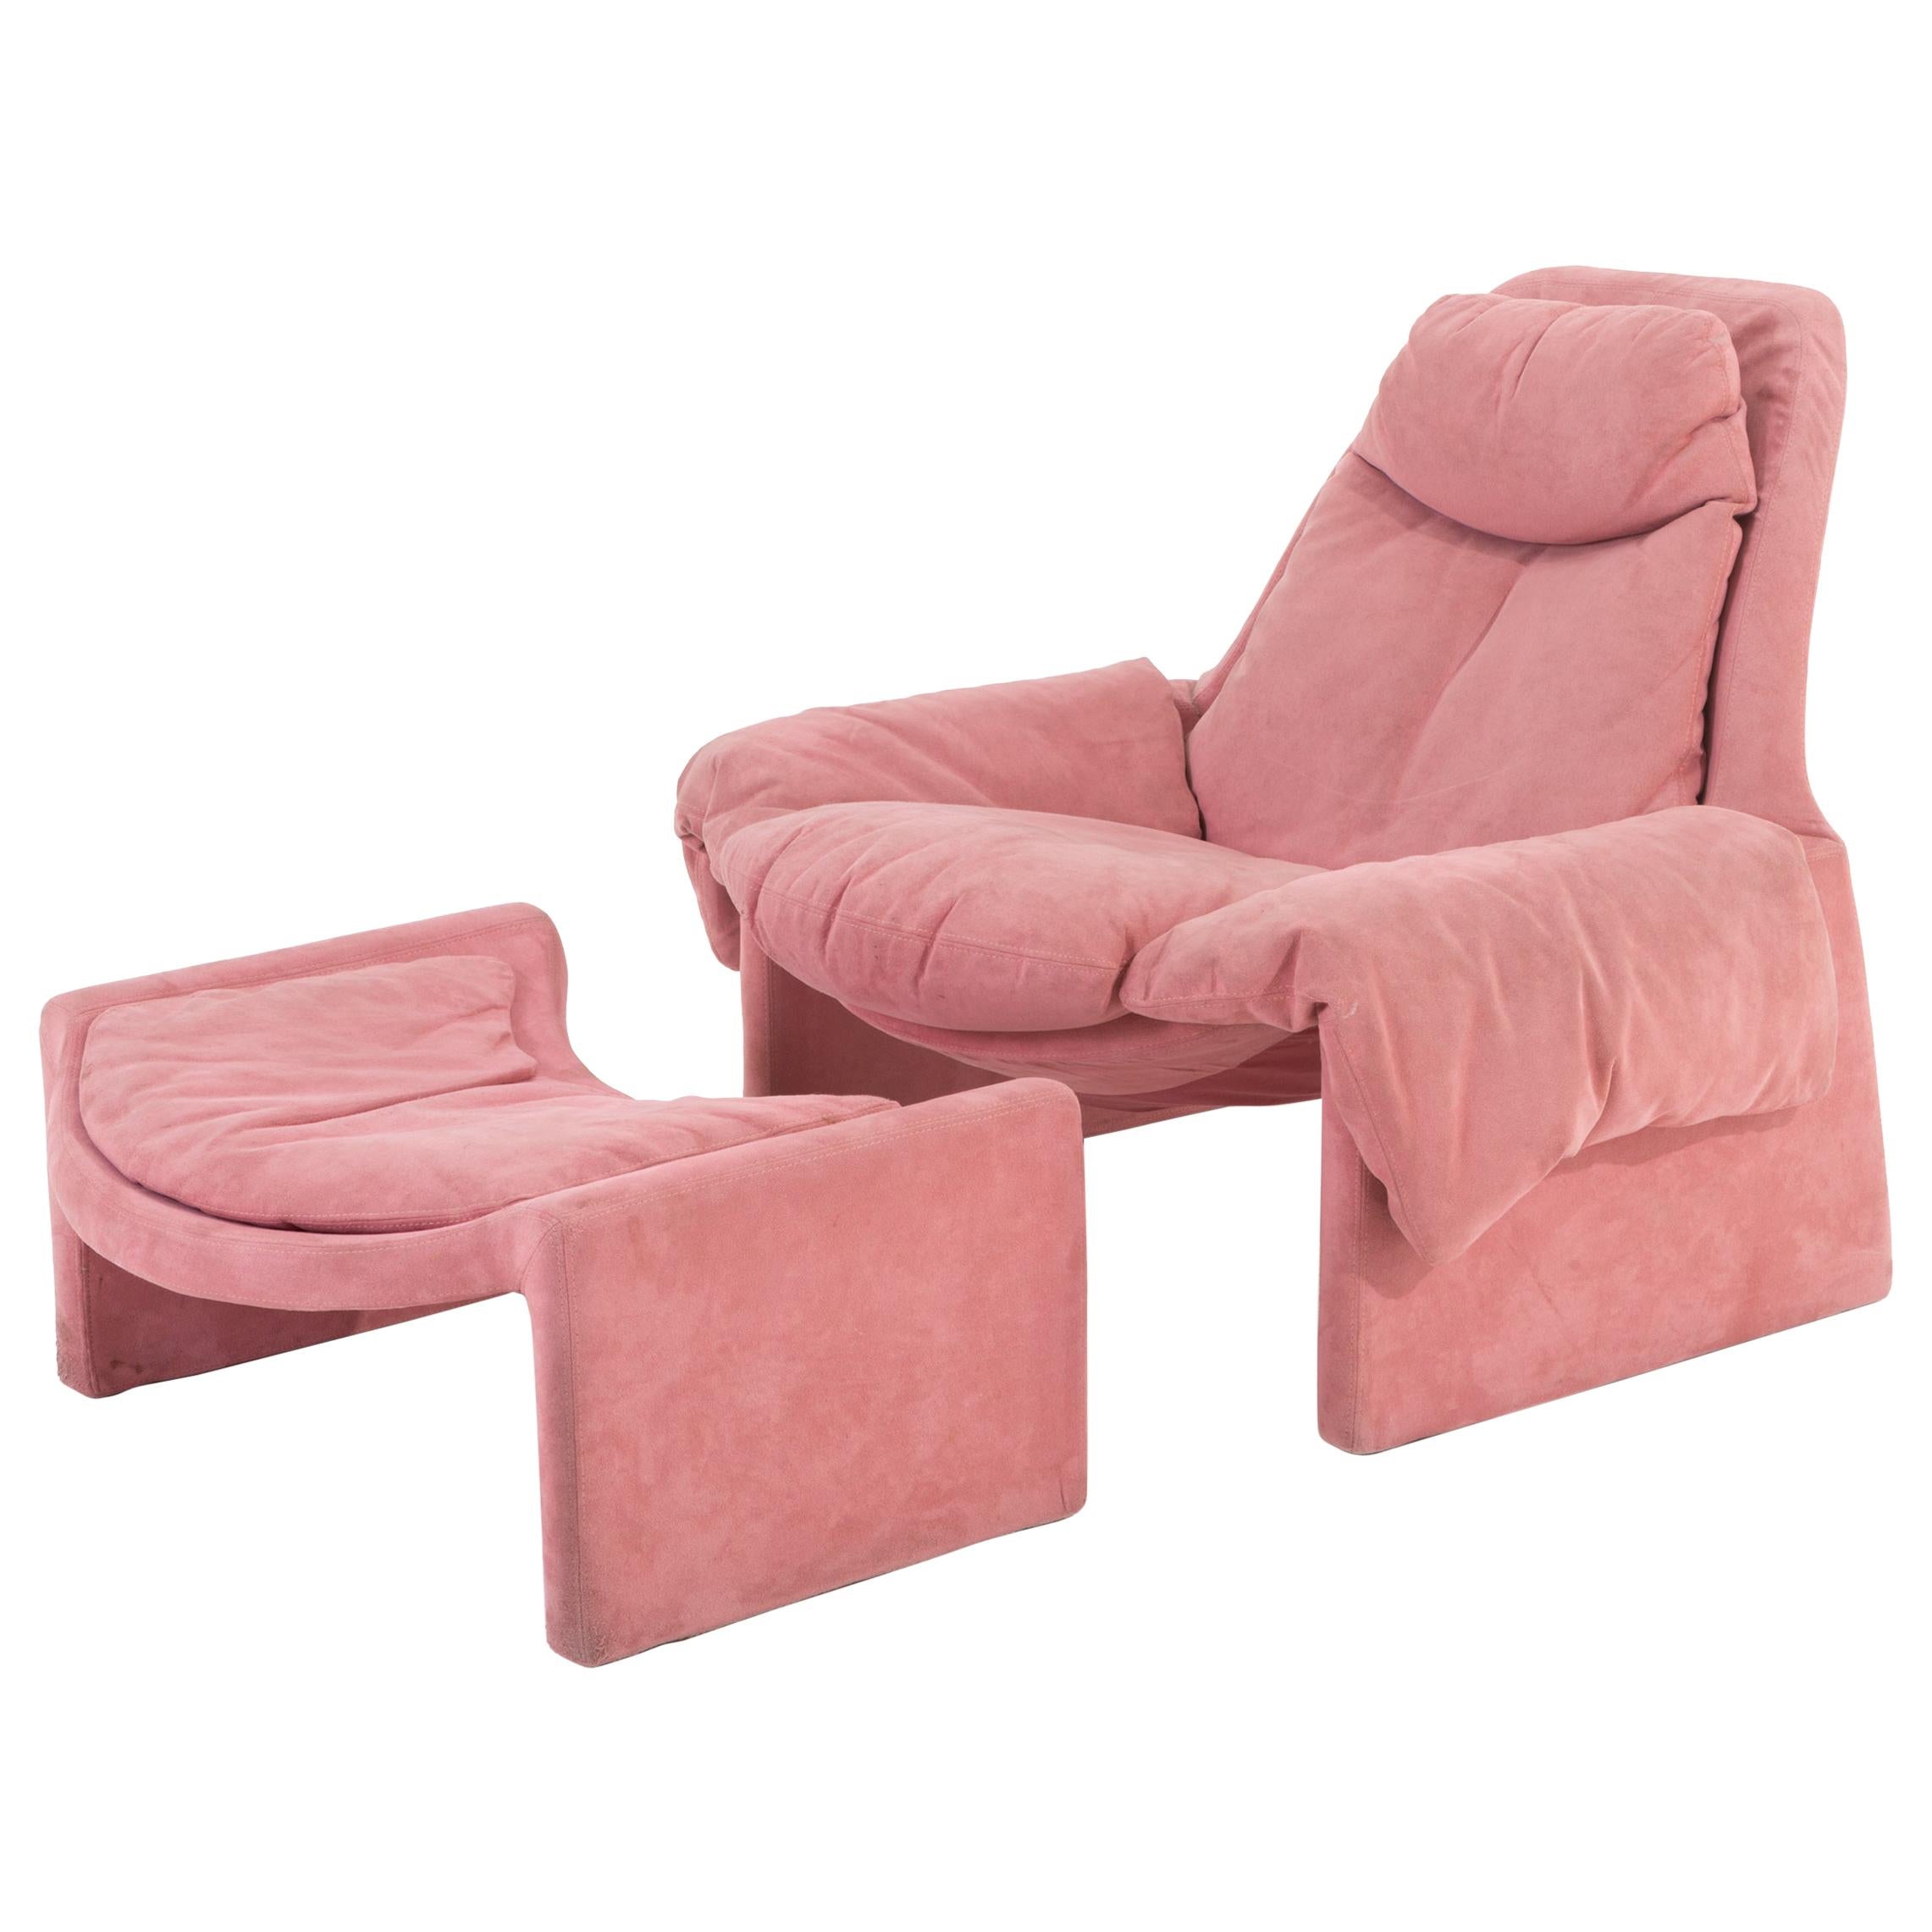 Armchair and Footrest in Pink Alcantara by Vittorio Introini for Saporiti